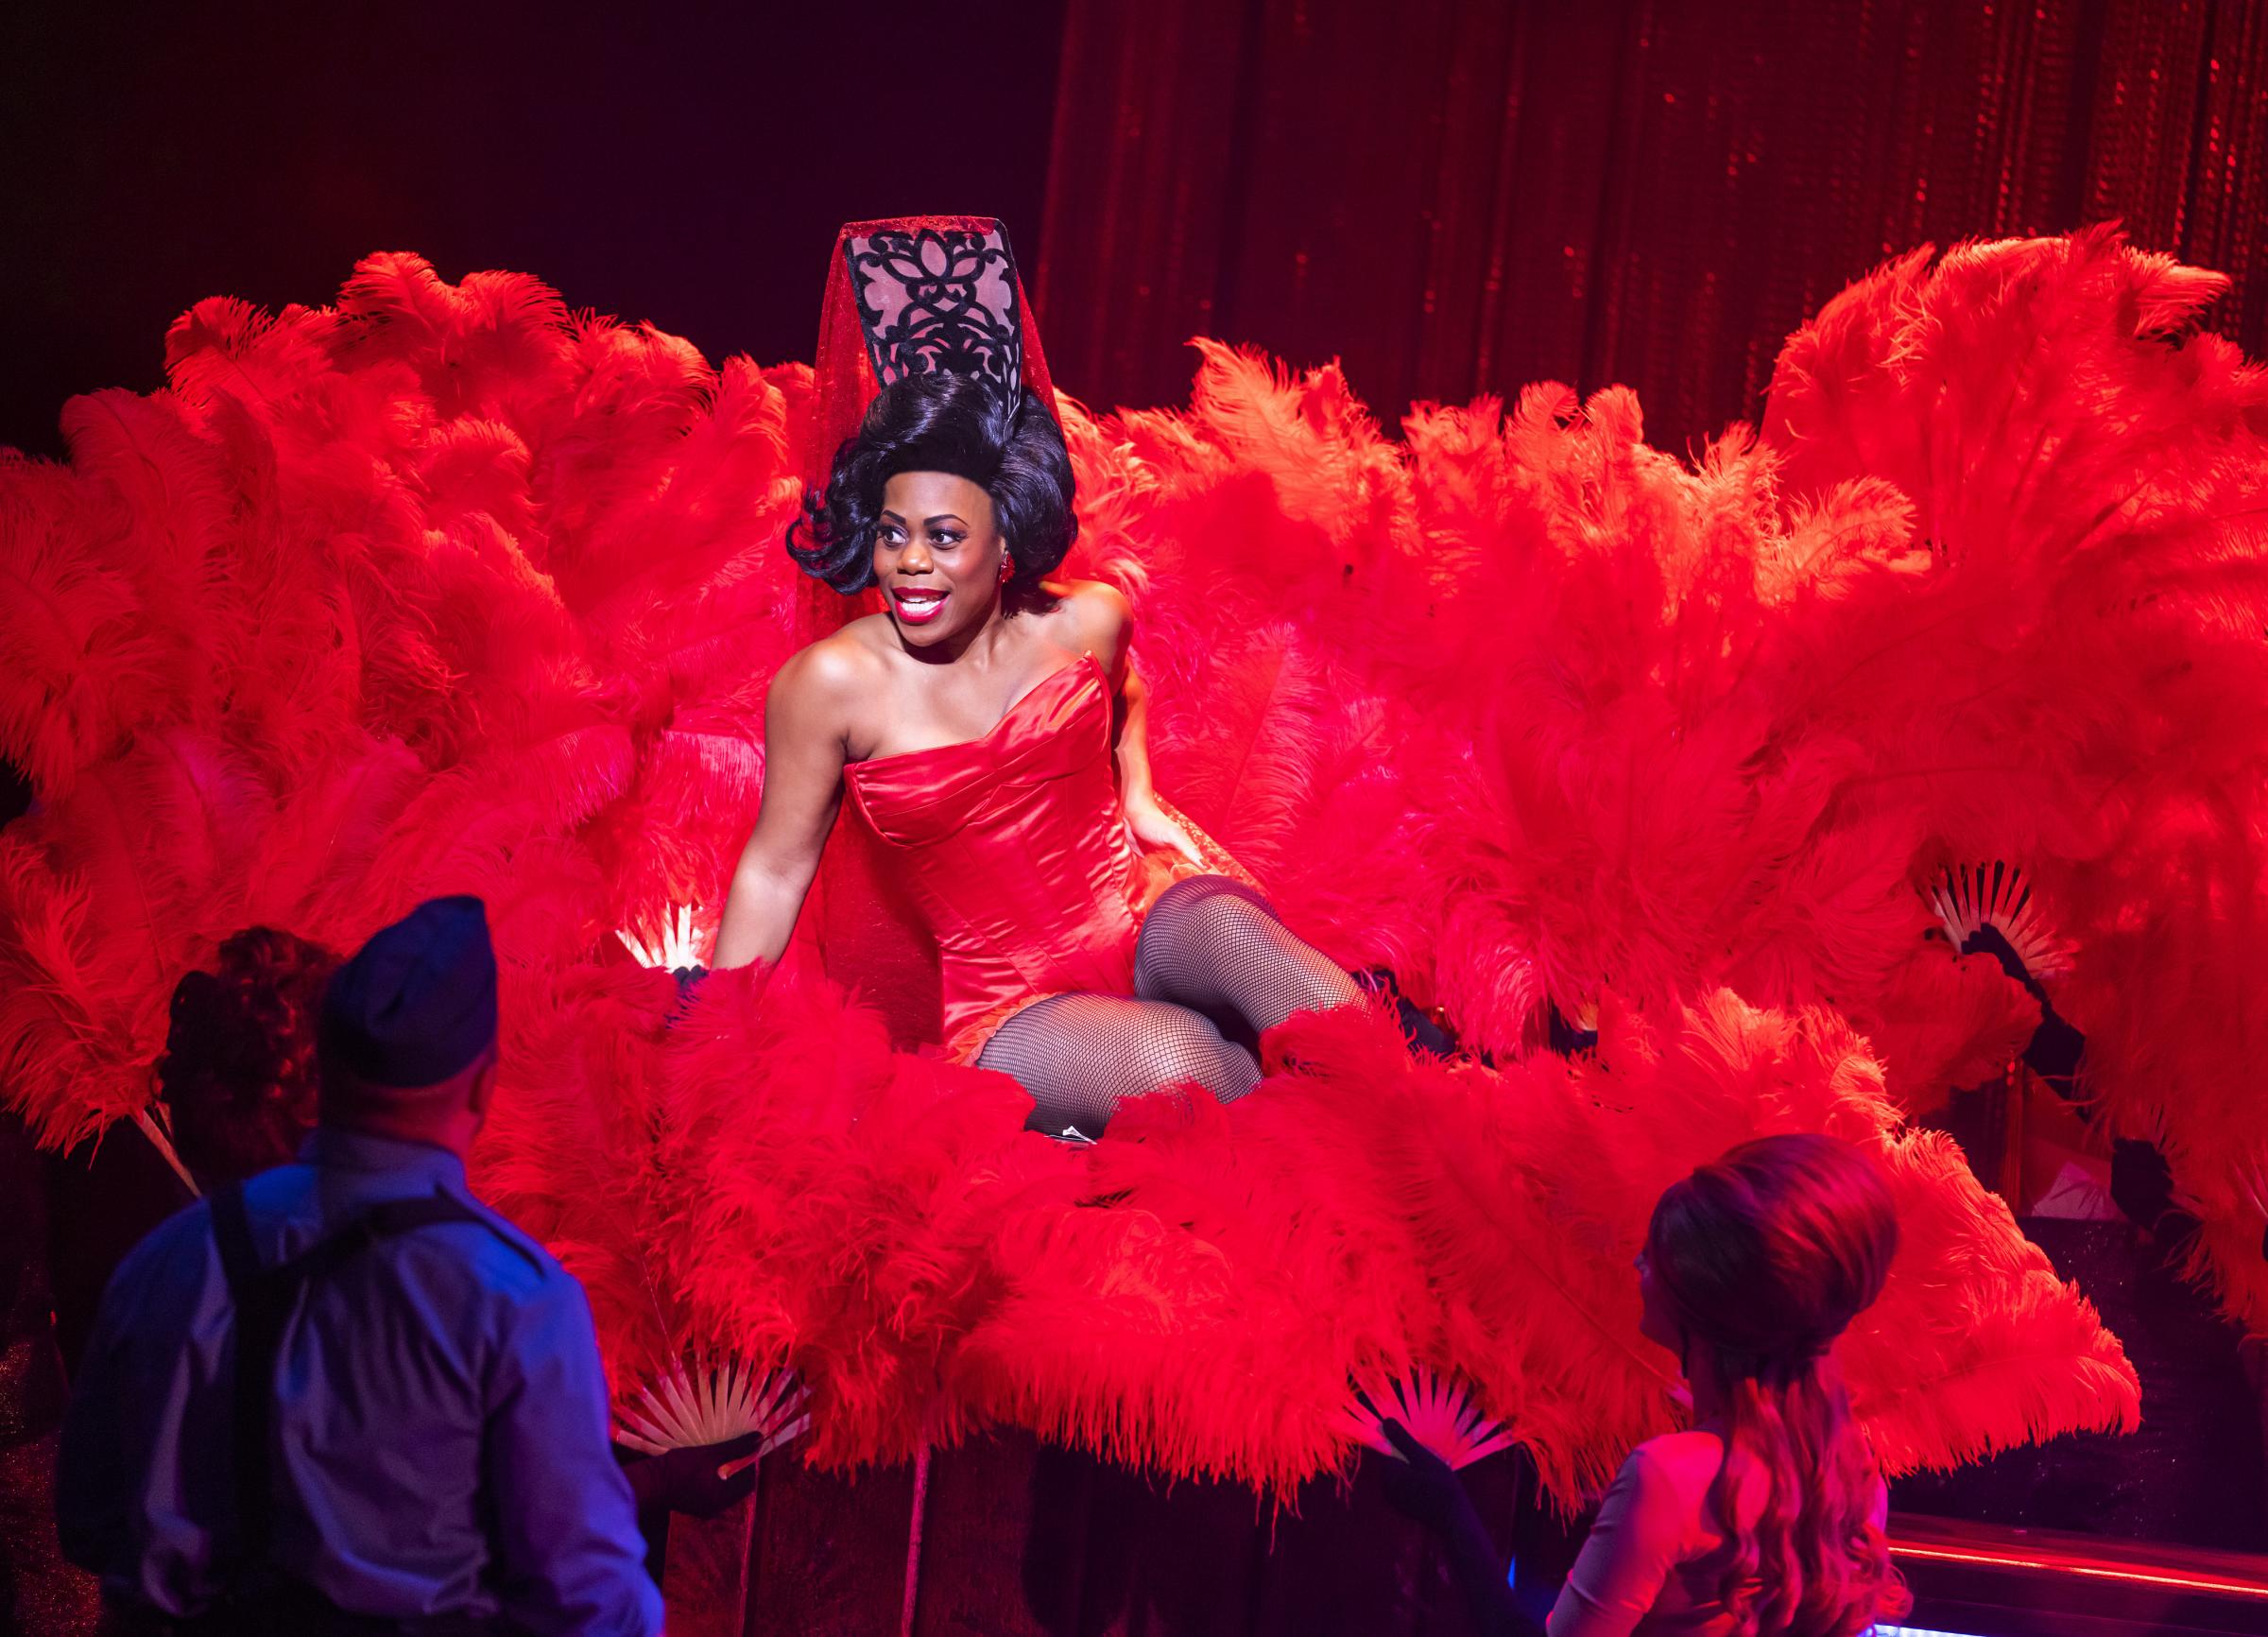 Carmen at the Lowry - just go and enjoy it says shows star